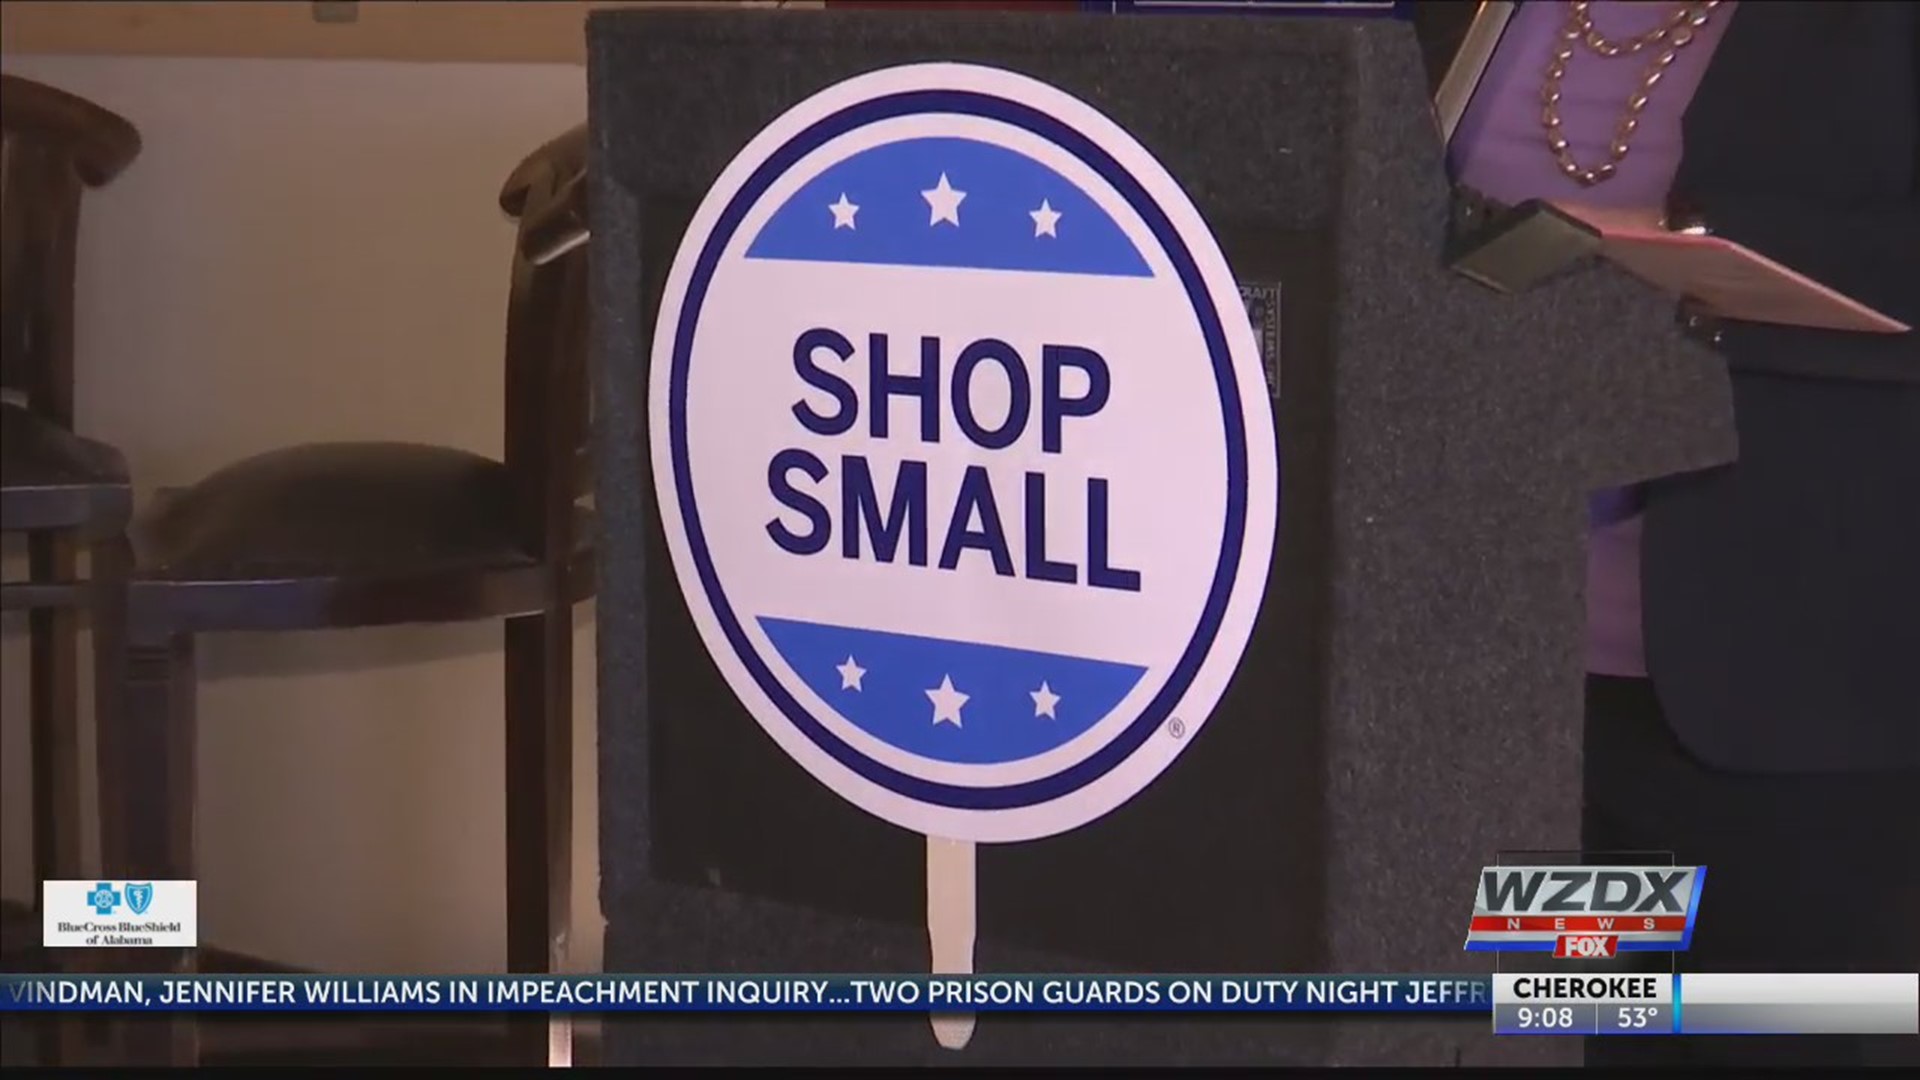 Black Friday may have you running to the nearest mall, but the Saturday after Thanksgiving all about shopping locally.